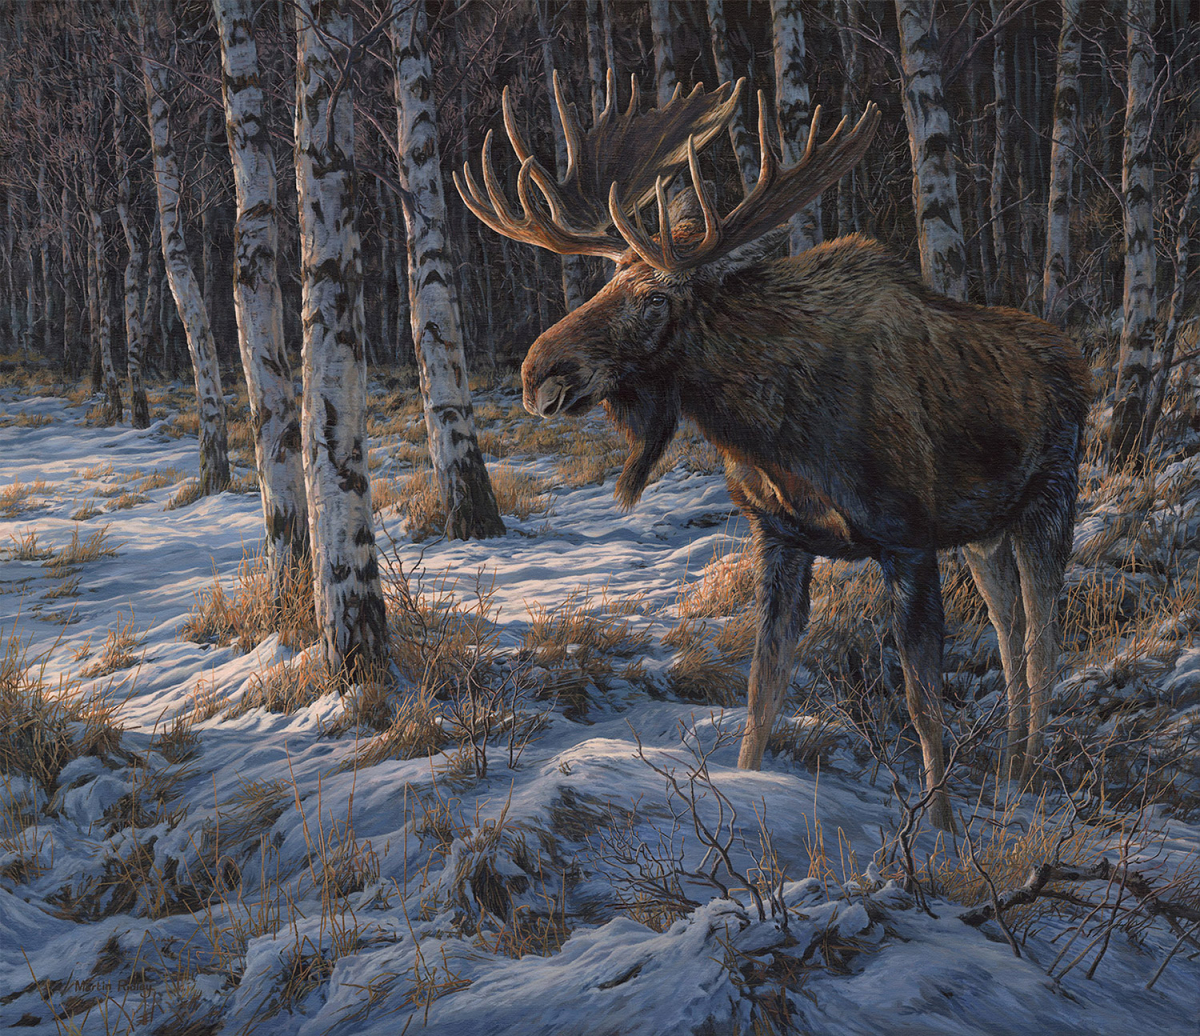 "Emerging from the Shadows", Bull Moose